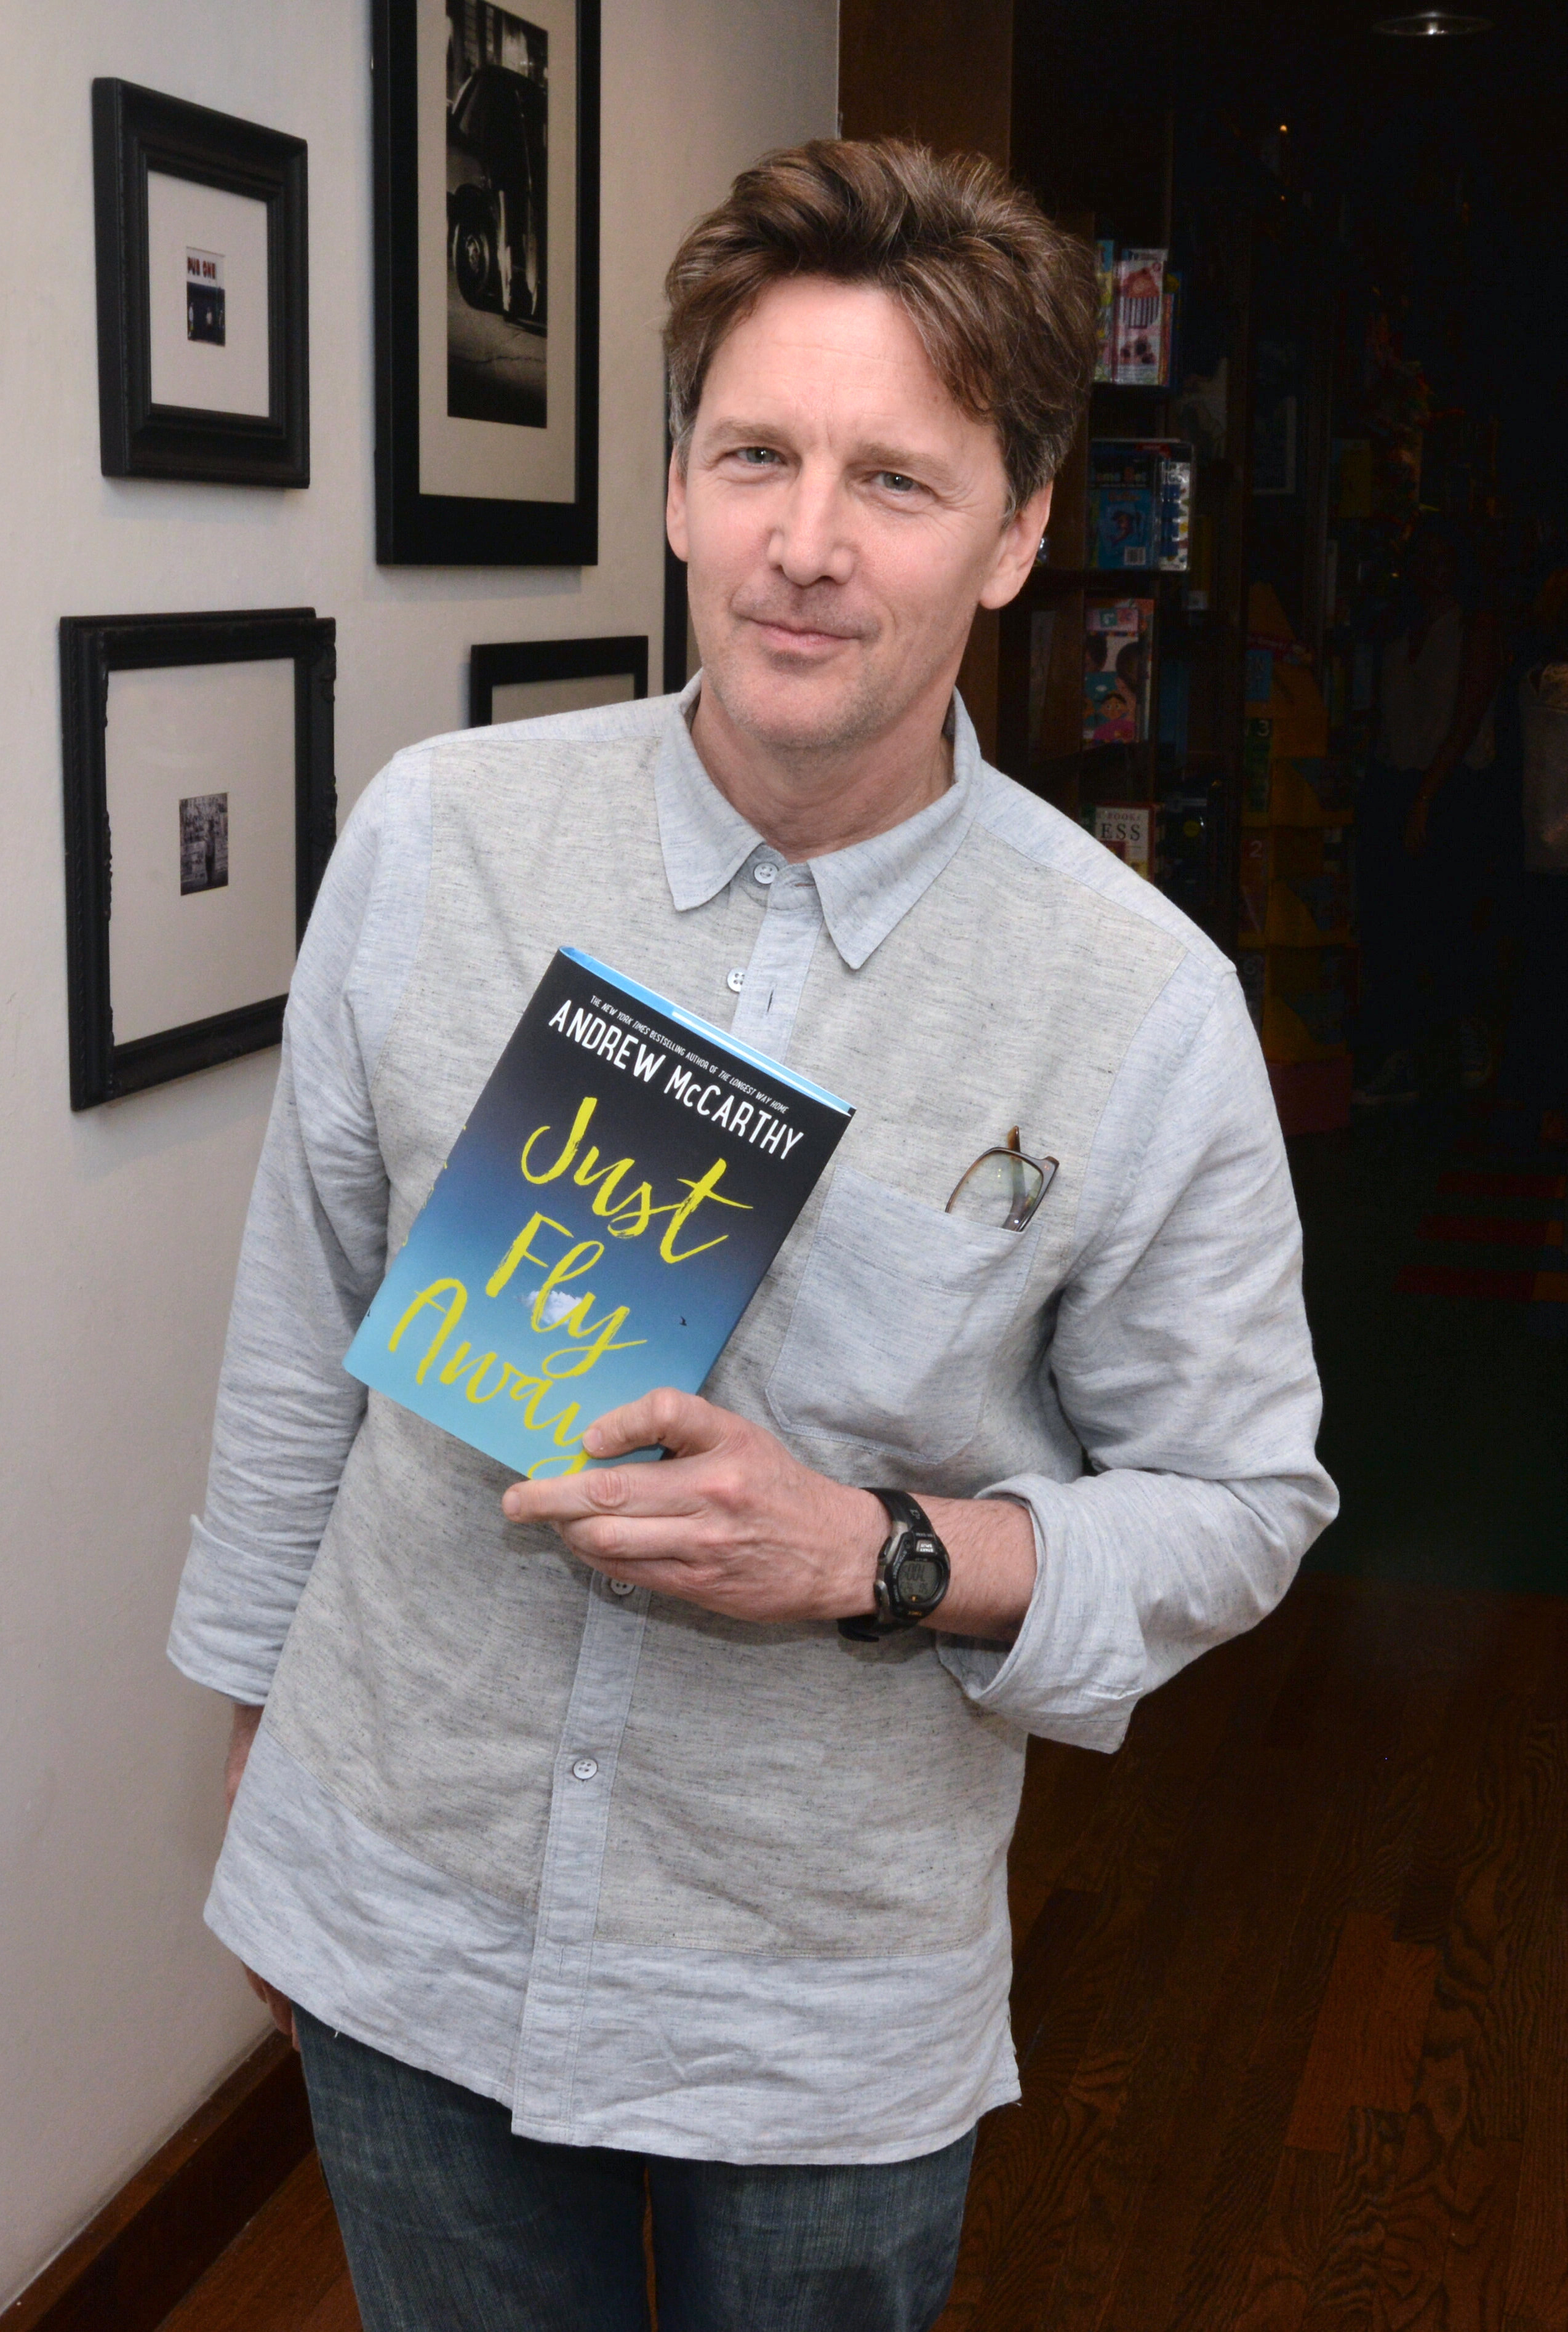 Andrew McCarthy promotes his book "Just Fly With Me" on April 21, 2017 | Source: Getty Images